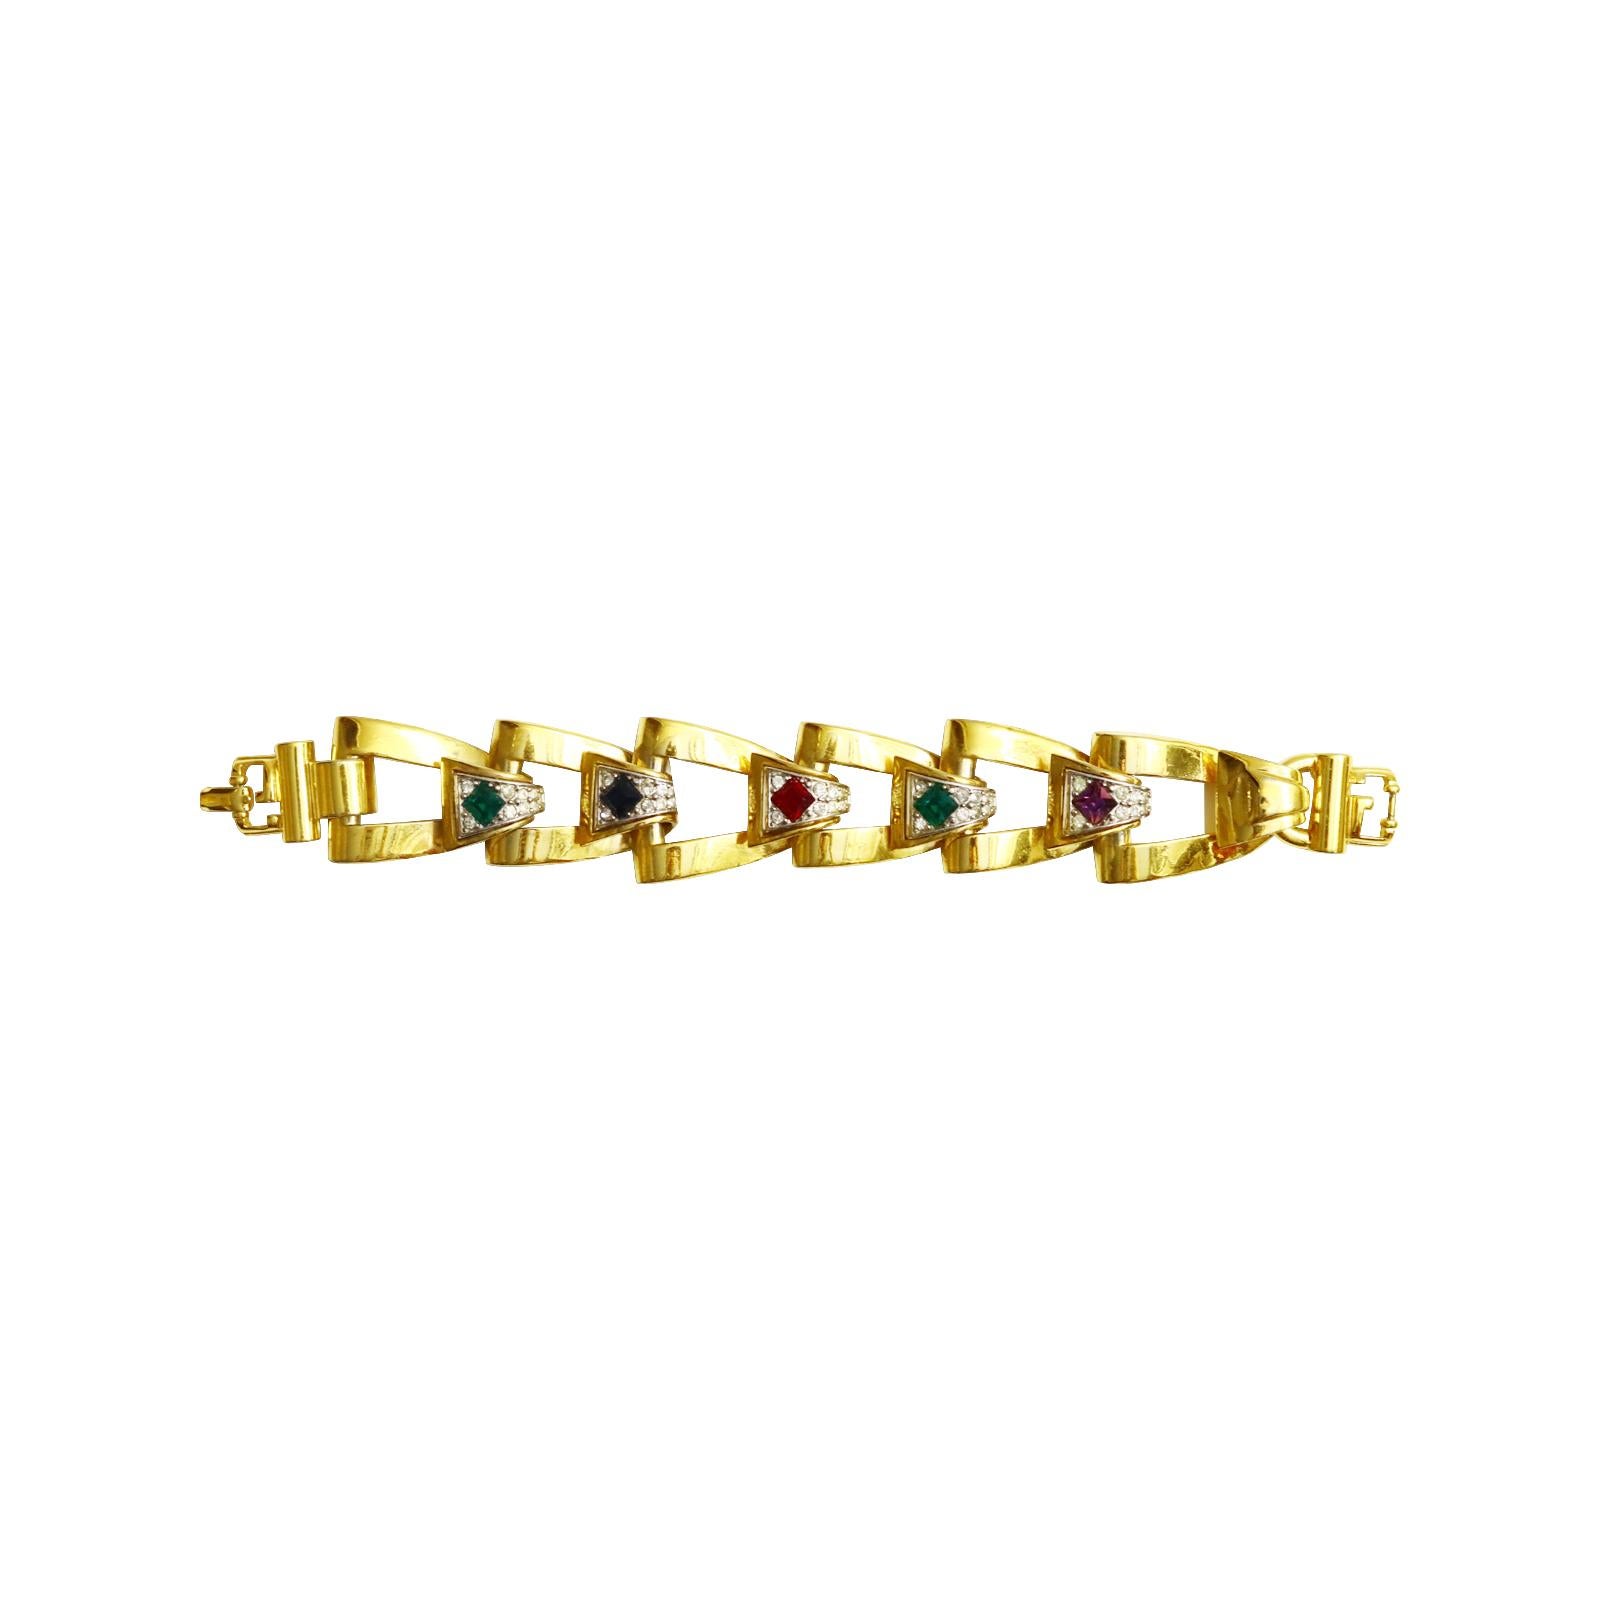 Vintage Givenchy Diamante and Gold Tone Link Bracelet Circa 1980s For Sale 1